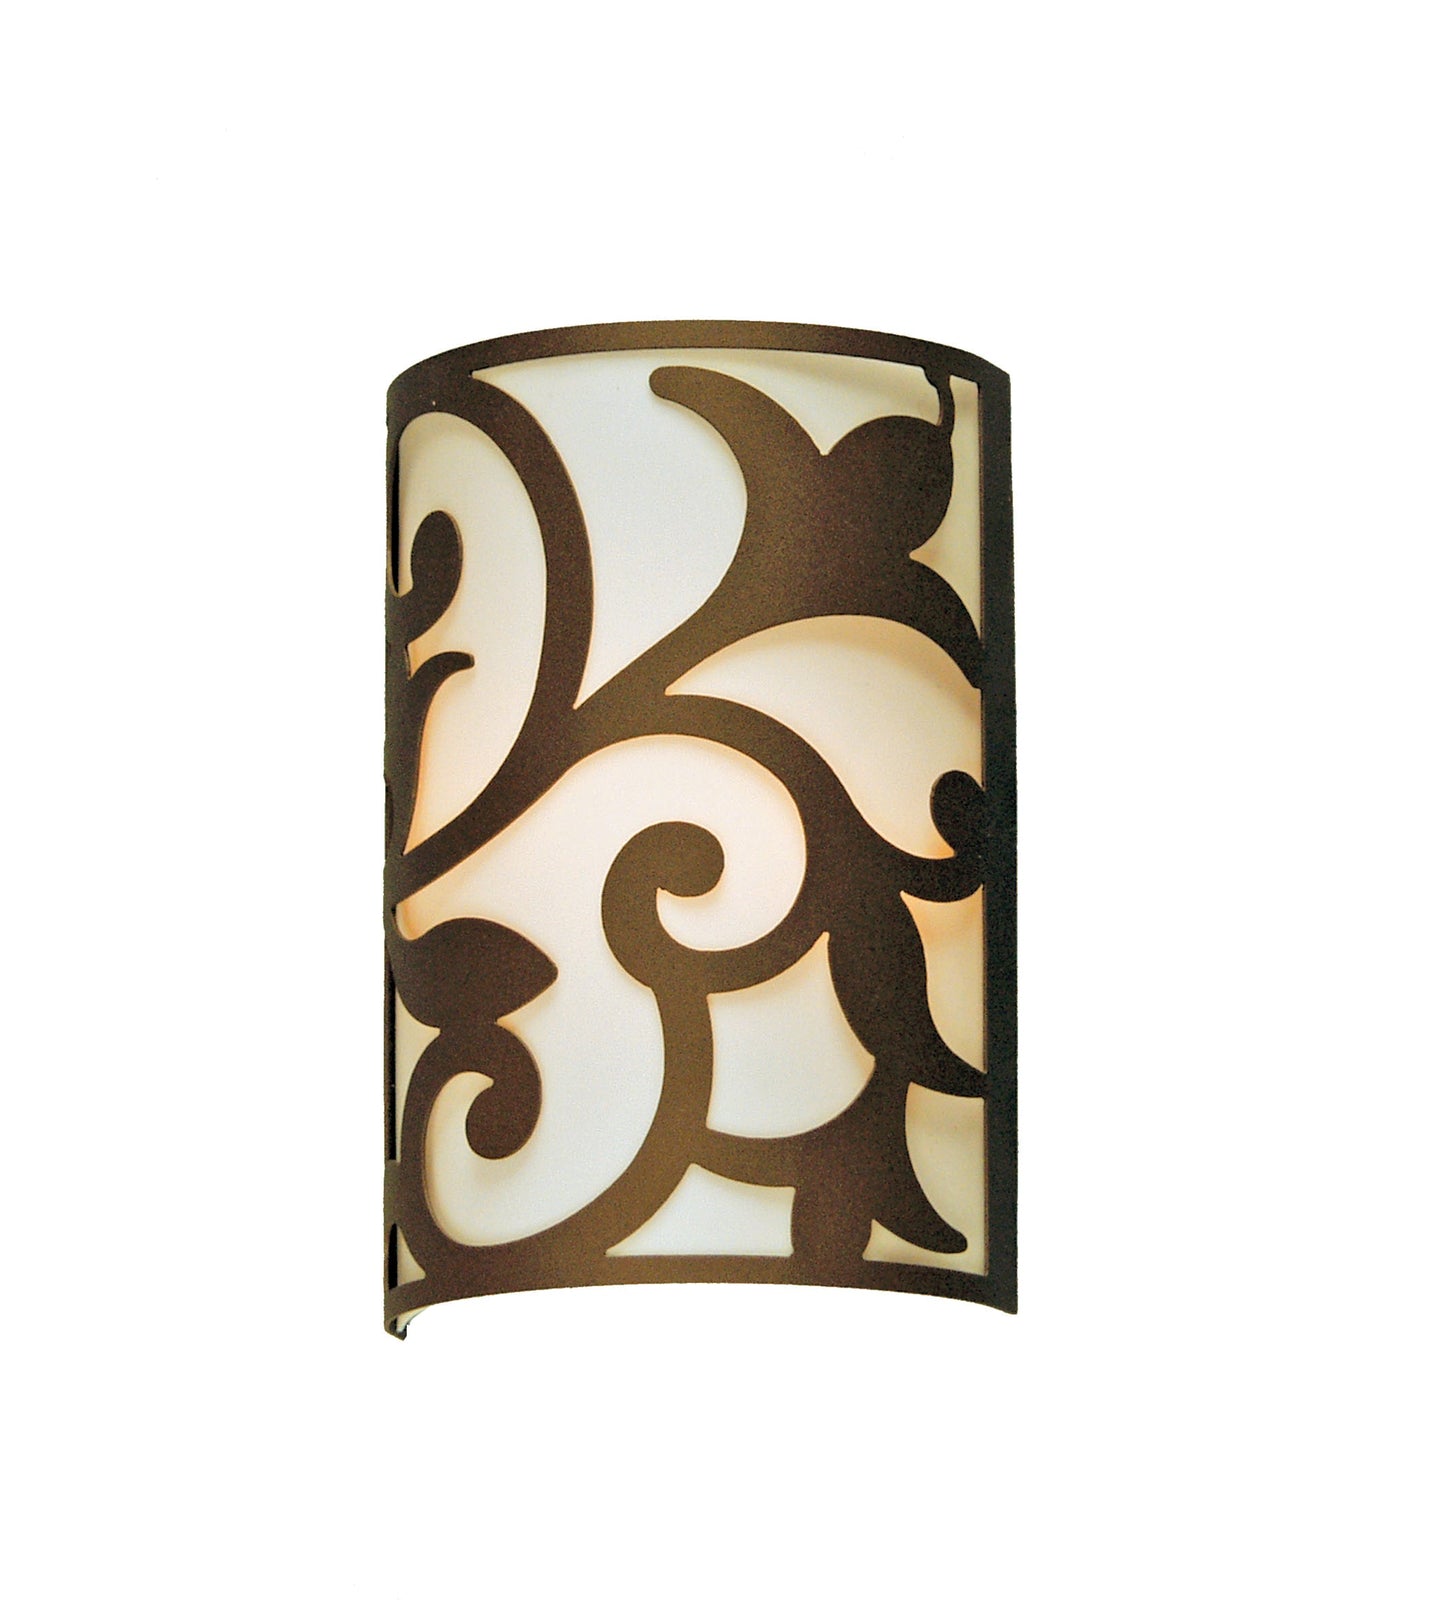 10" Rickard Wall Sconce by 2nd Ave Lighting